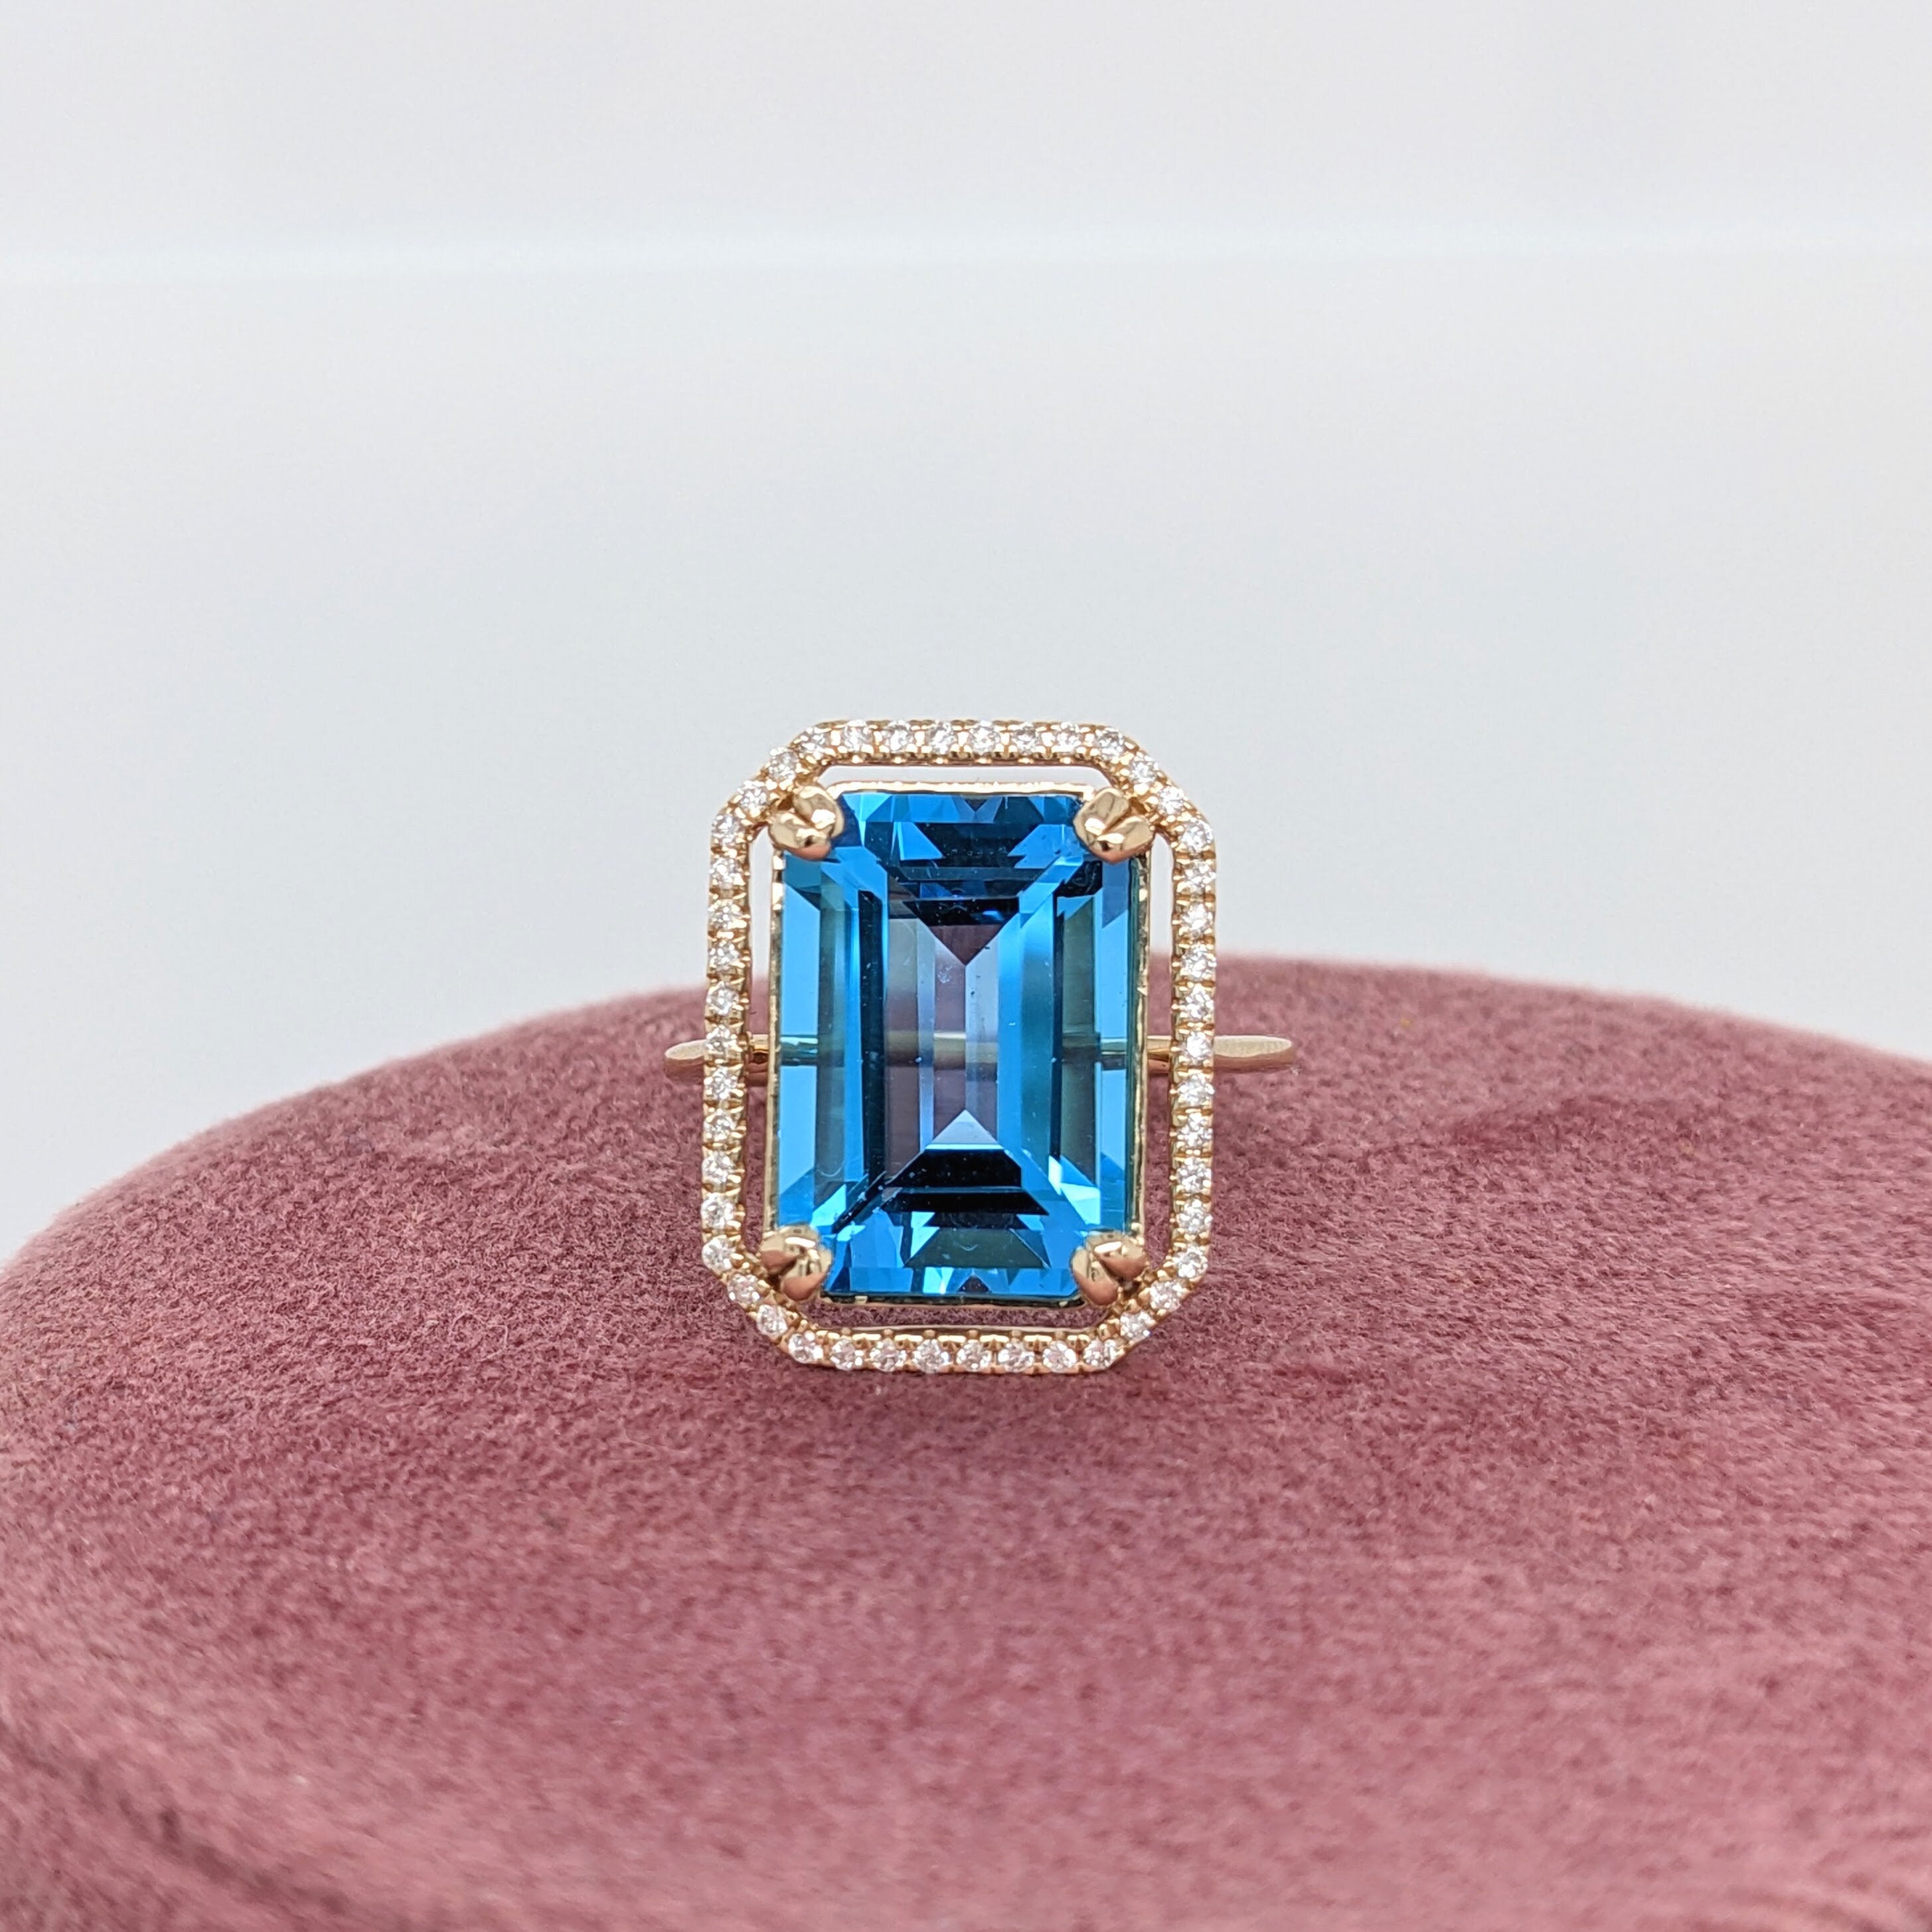 Swiss Blue Topaz Statement Ring w an All Natural Diamond Halo in Solid 14K Yellow Gold | Emerald Cut 14x10mm | December Birthday | Blue Gem